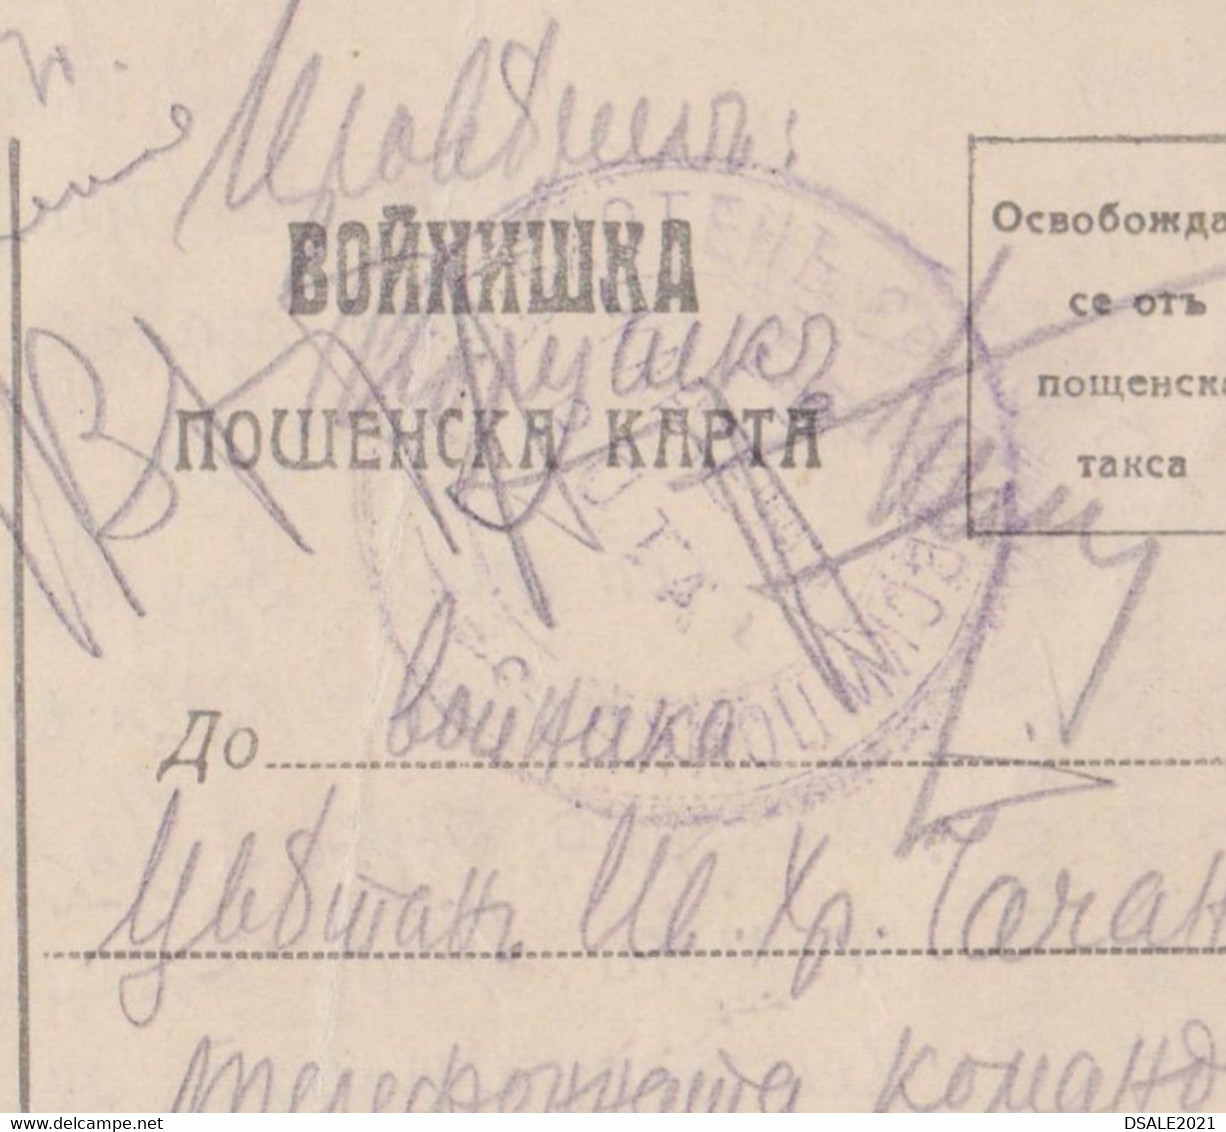 Bulgaria Ww1-1917 Military Formula Card Stationery Soldier Censored (33th Infantry Regiment-9th Division) (56106) - Krieg